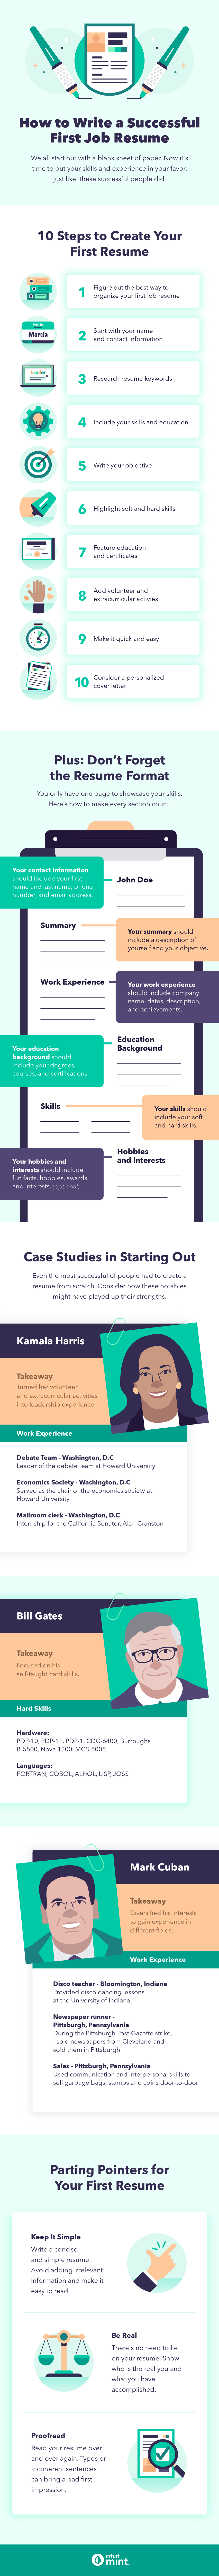 An infographic describes how to create a first job resume and includes tips from successful people's resumes. 